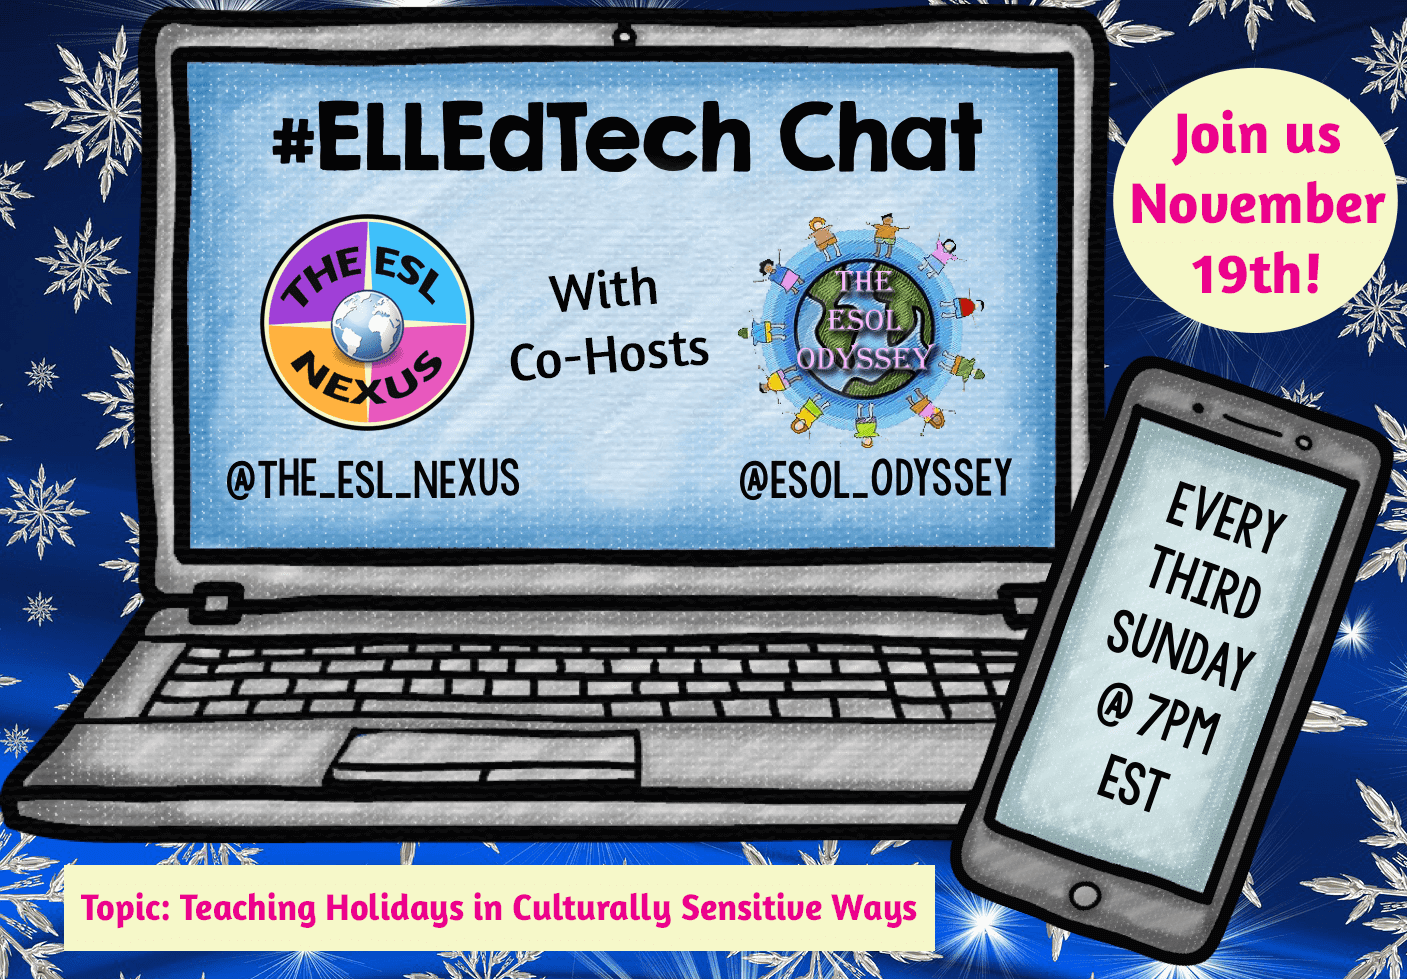 Come & join the discussion about using tech tools to teach about holidays in a culturally sensitive way in the #ELLEdTech Twitter chat on 11/19/17 | The ESL Nexus